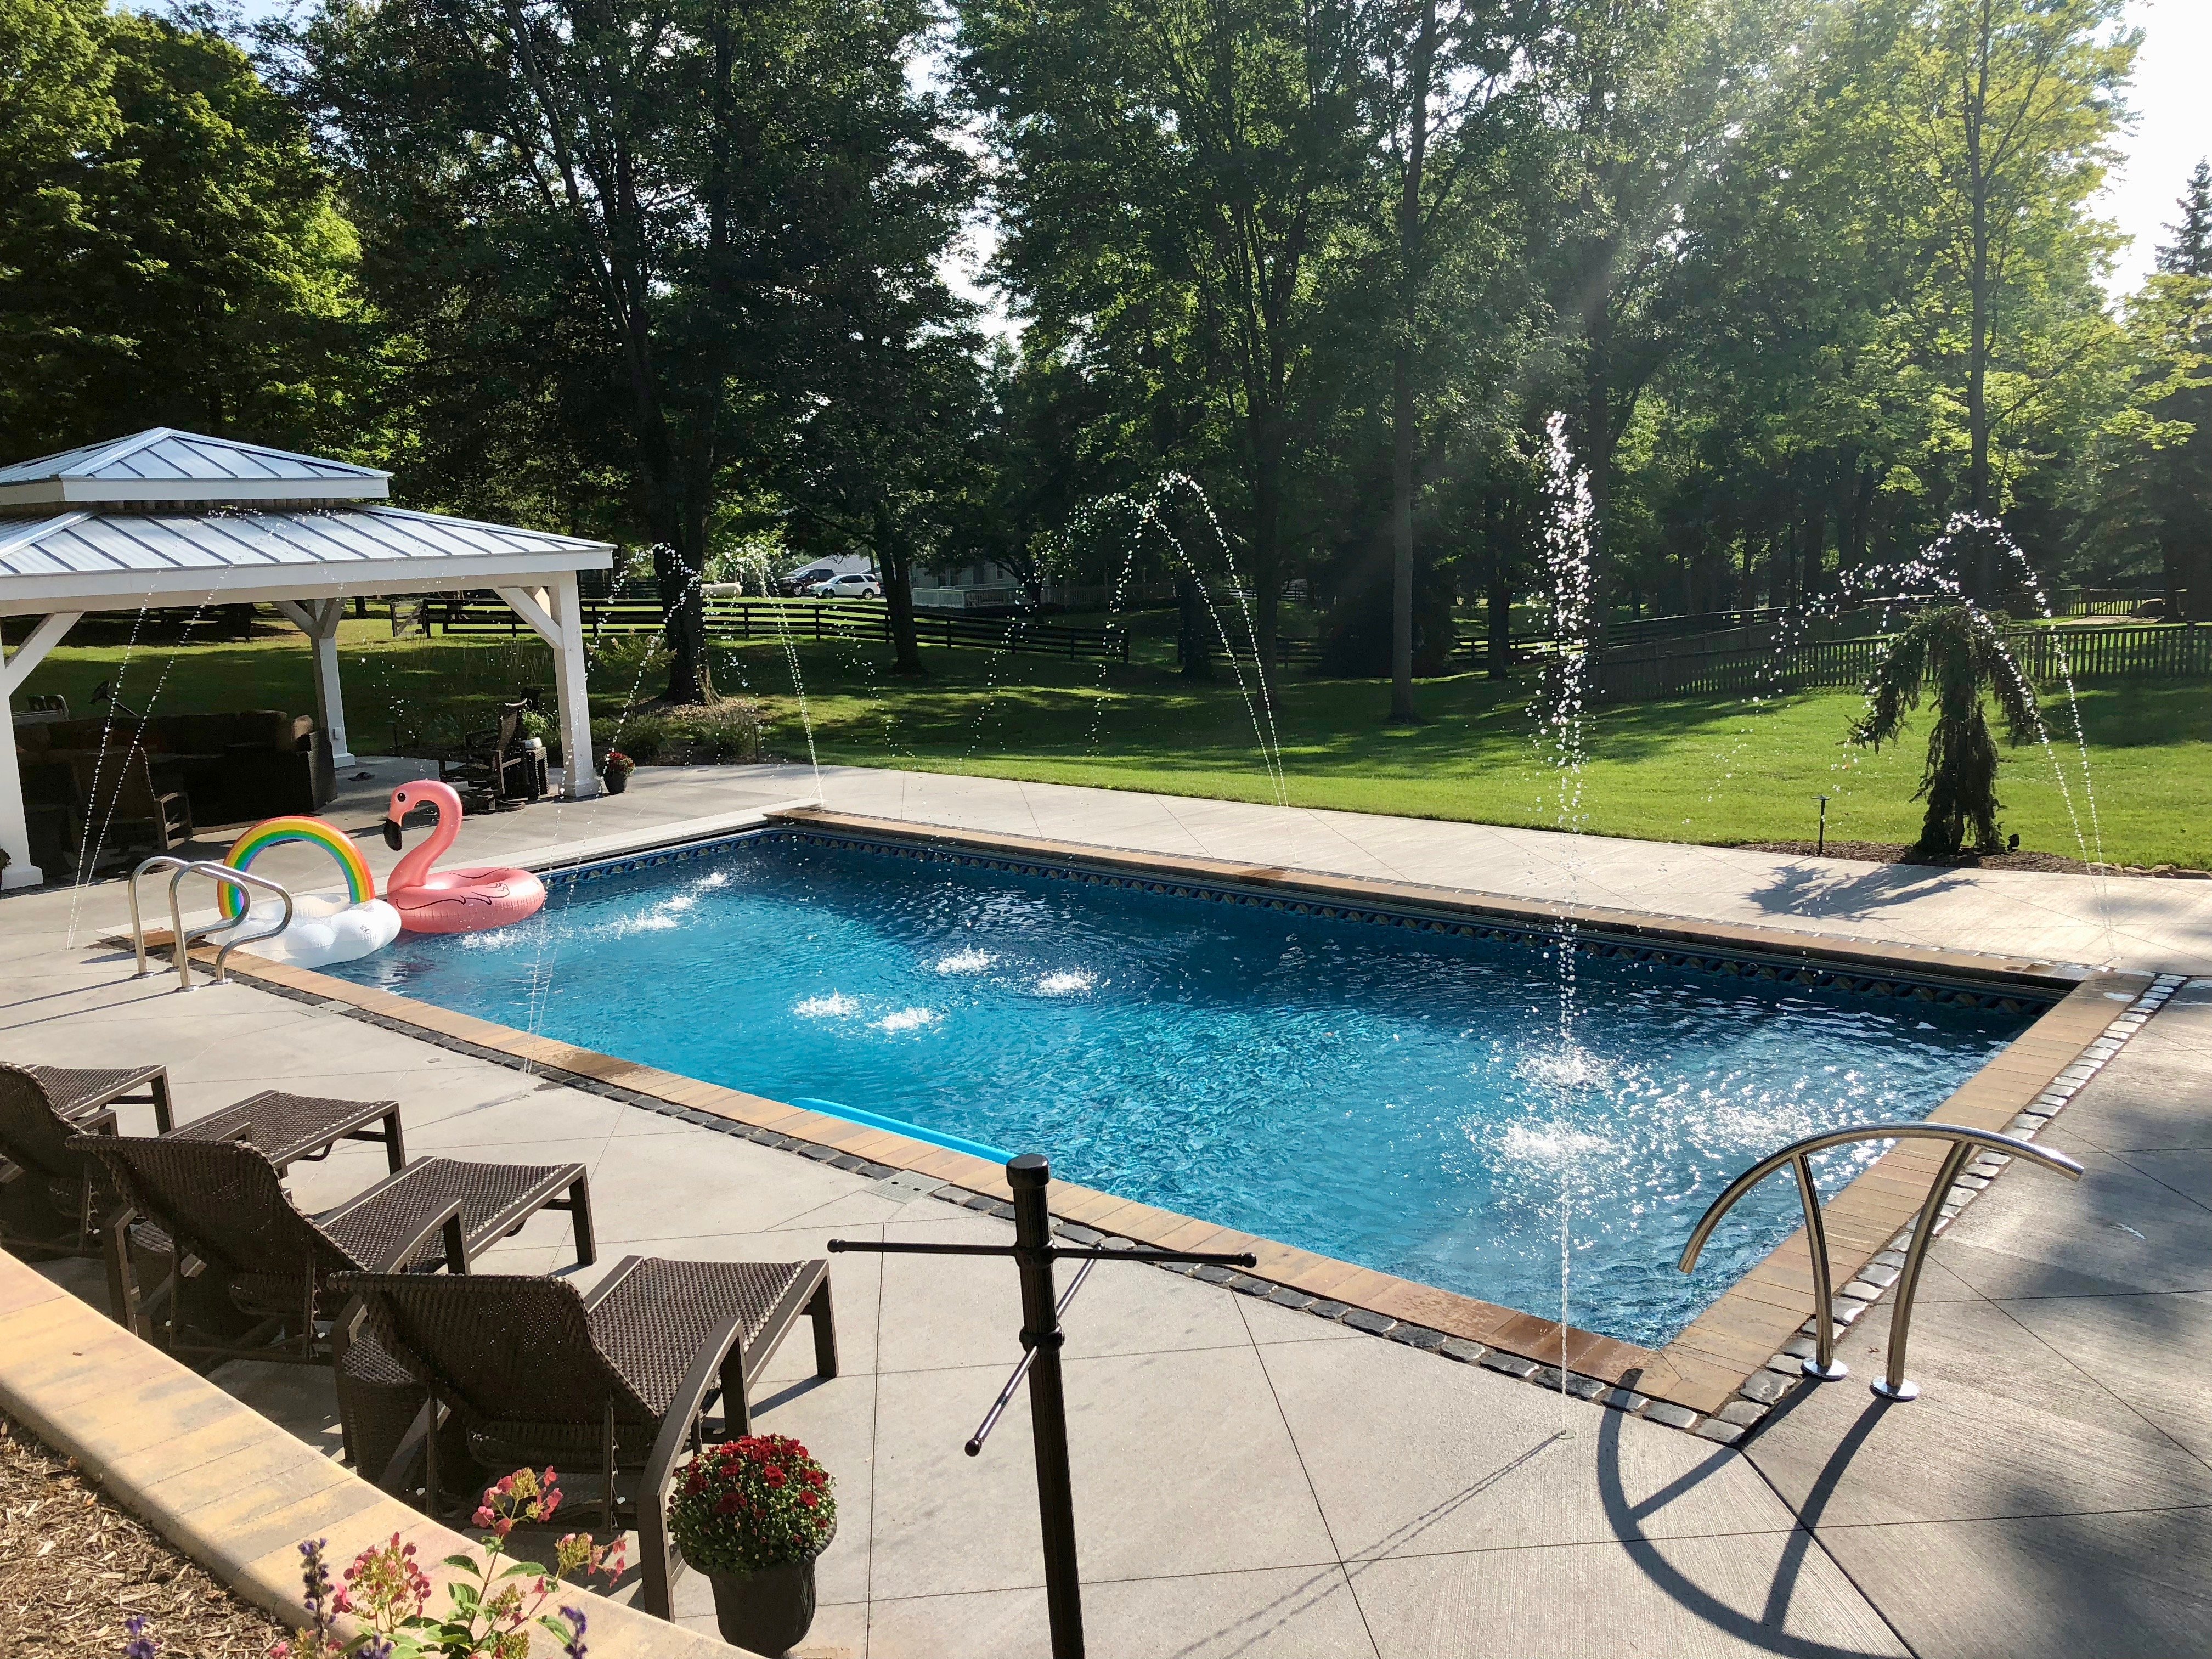 How Much Does An Inground Pool Cost, Cost To Install Small Inground Pool